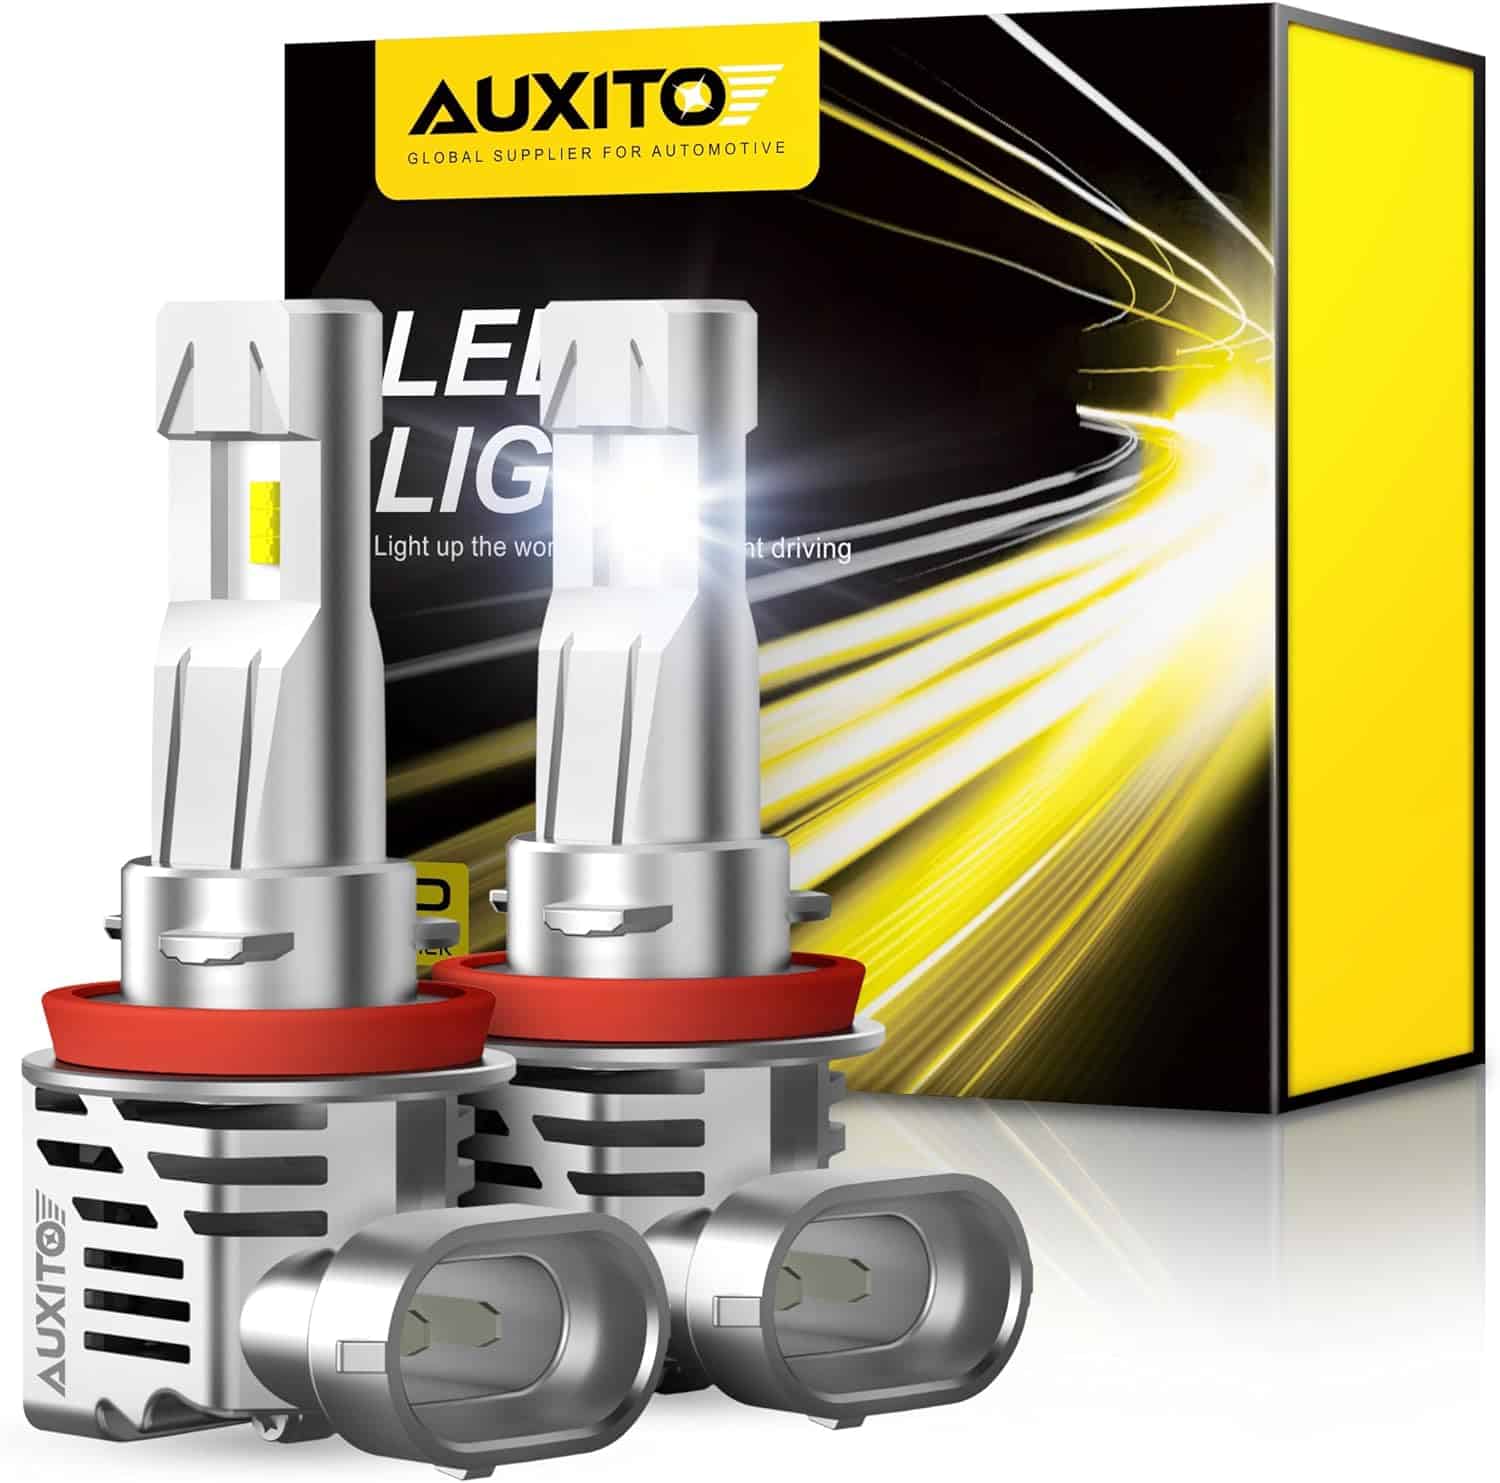 AUXITO H11/H8/H9 LED Bulb, 12000 Lumens 300% High Brightness, 6500K Cool White, Direct Installation Fog Light Bulbs Plug and Play, Pack of 2